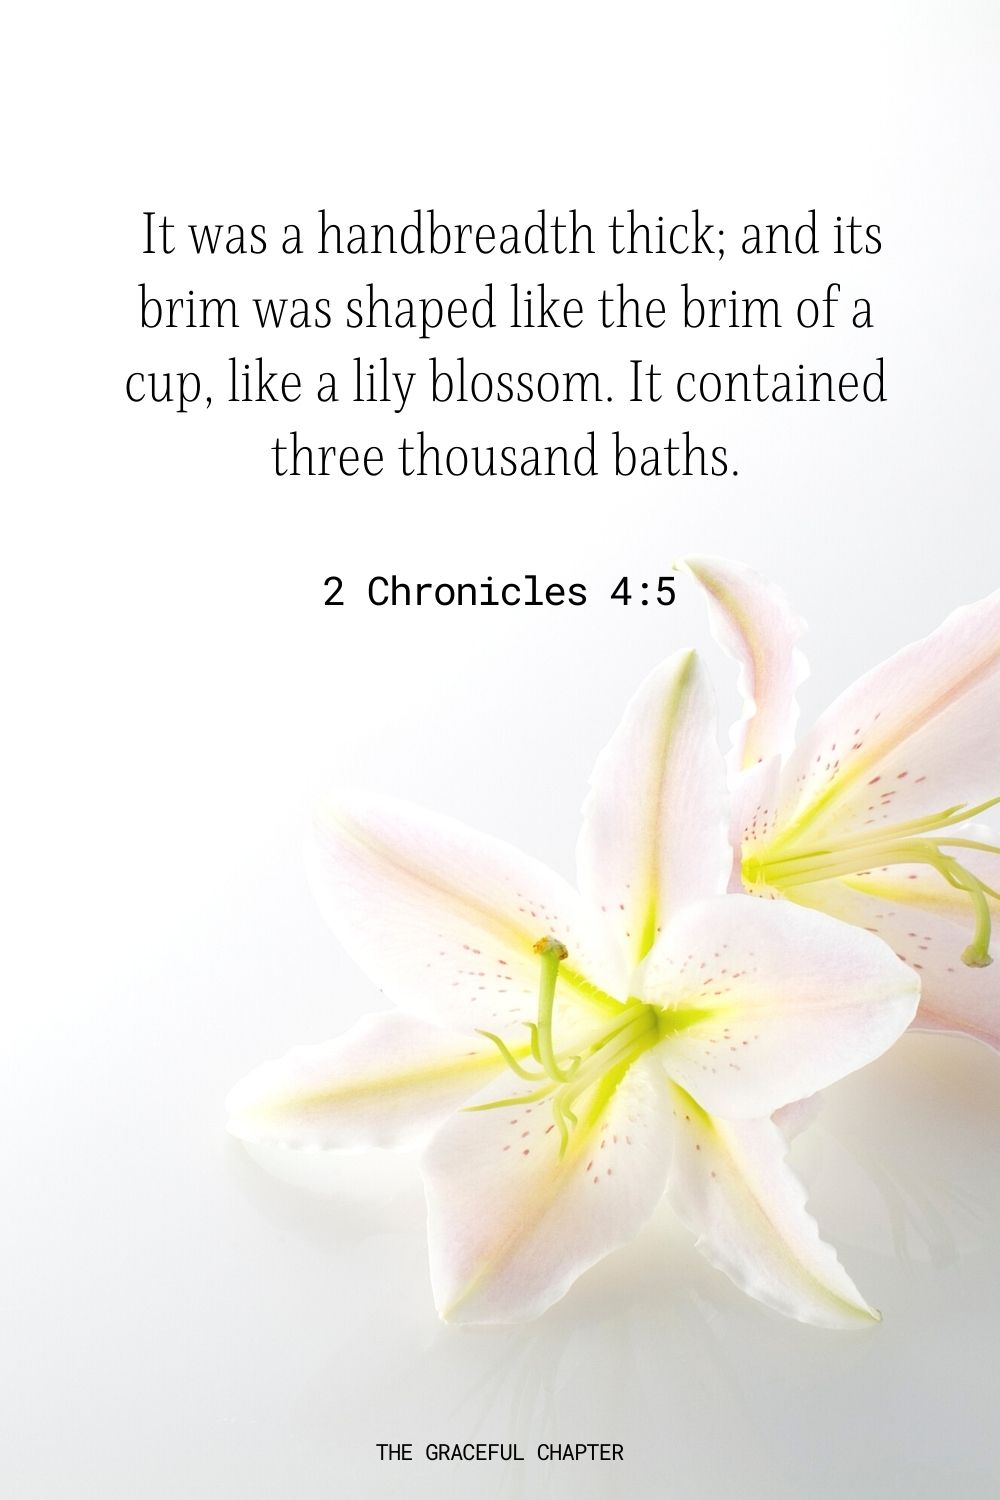  It was a handbreadth thick; and its brim was shaped like the brim of a cup, like a lily blossom. It contained three thousand baths. 2 Chronicles 4:5